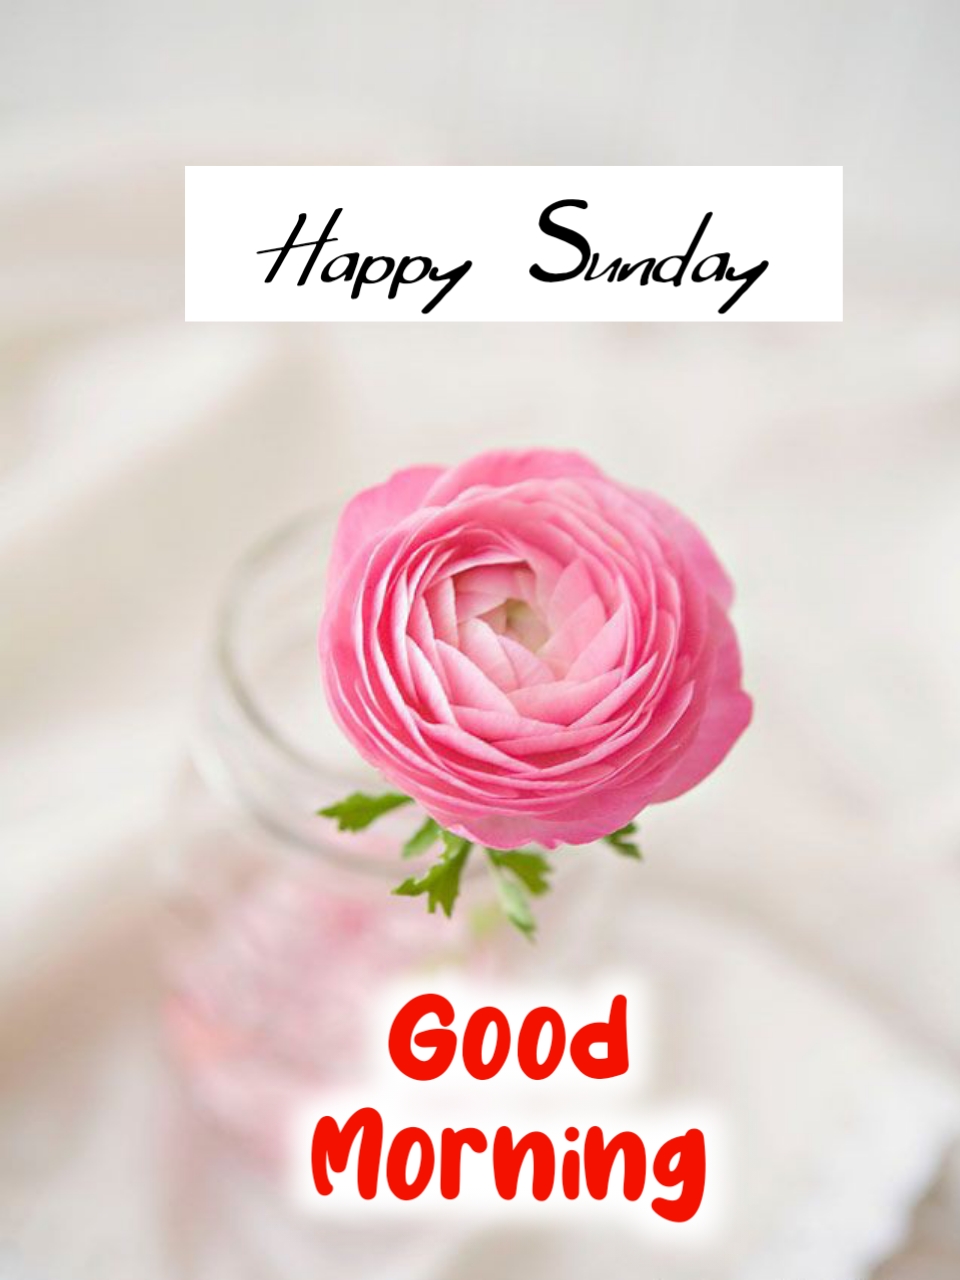 Read rose happy Sunday images